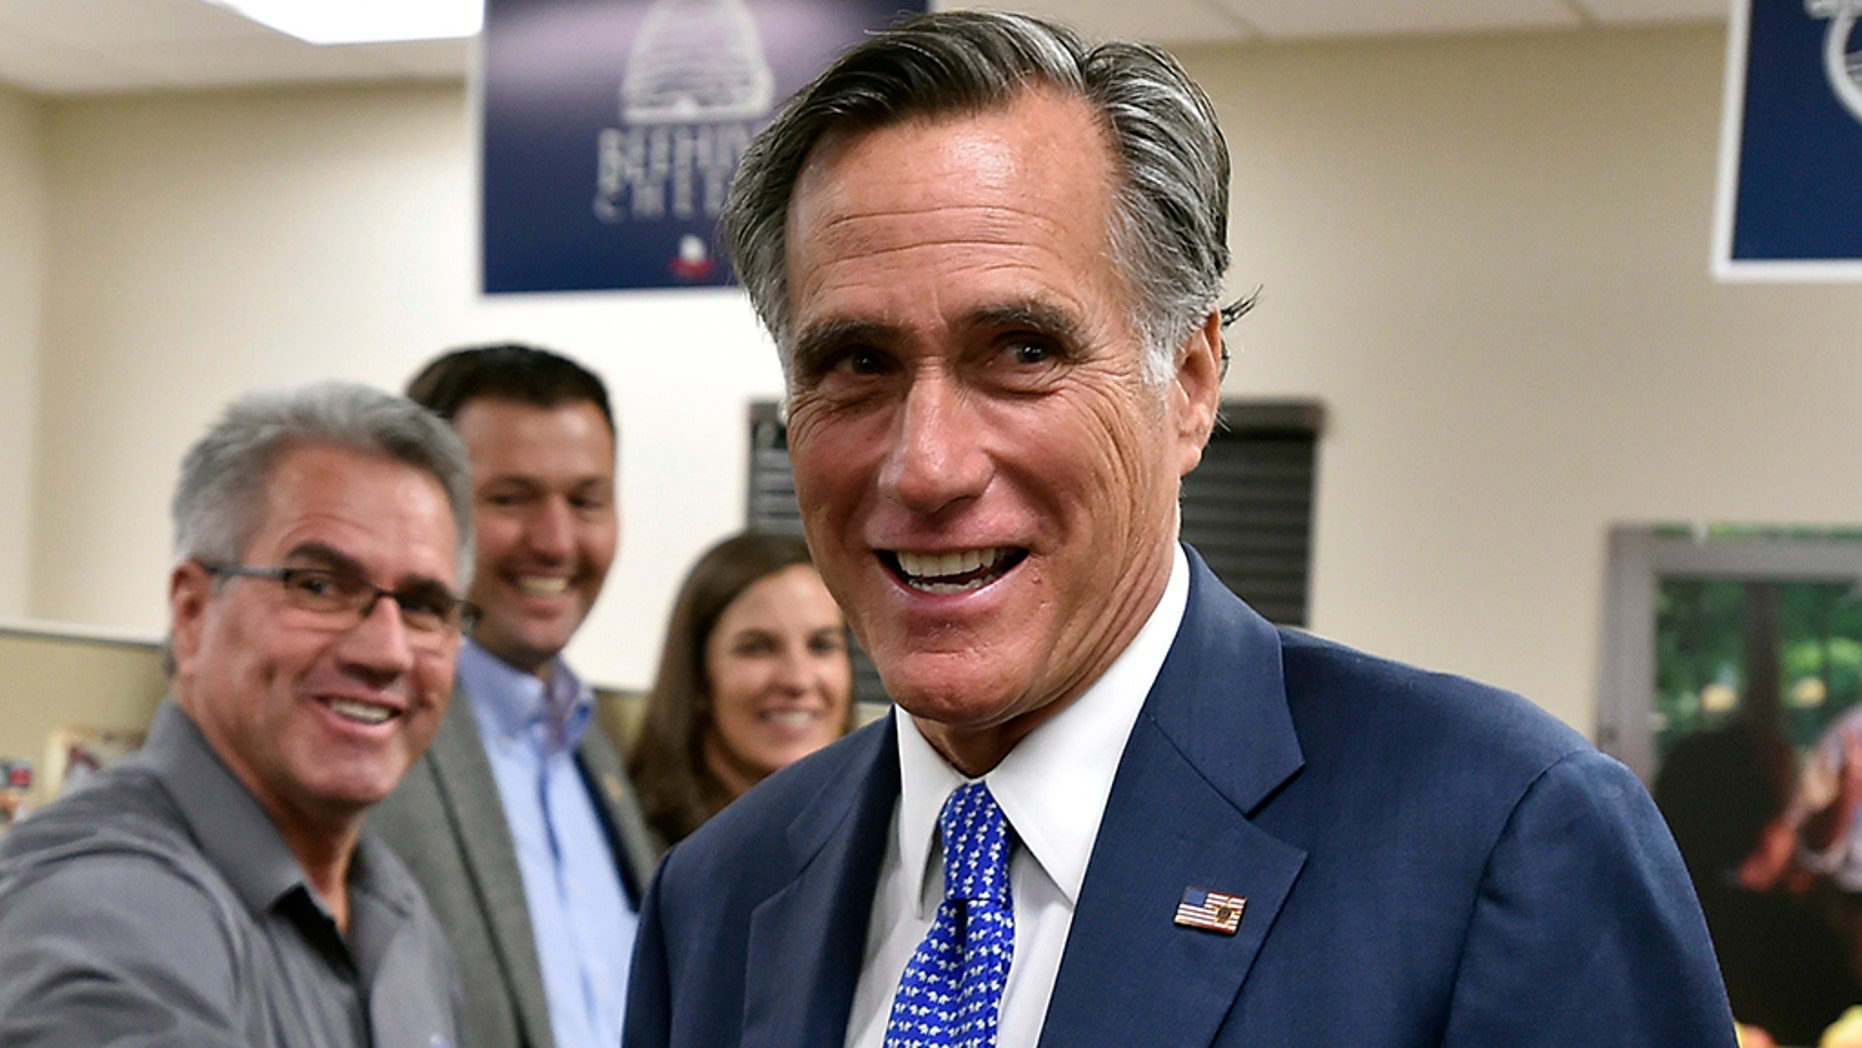 Romney, answering critics, says country 